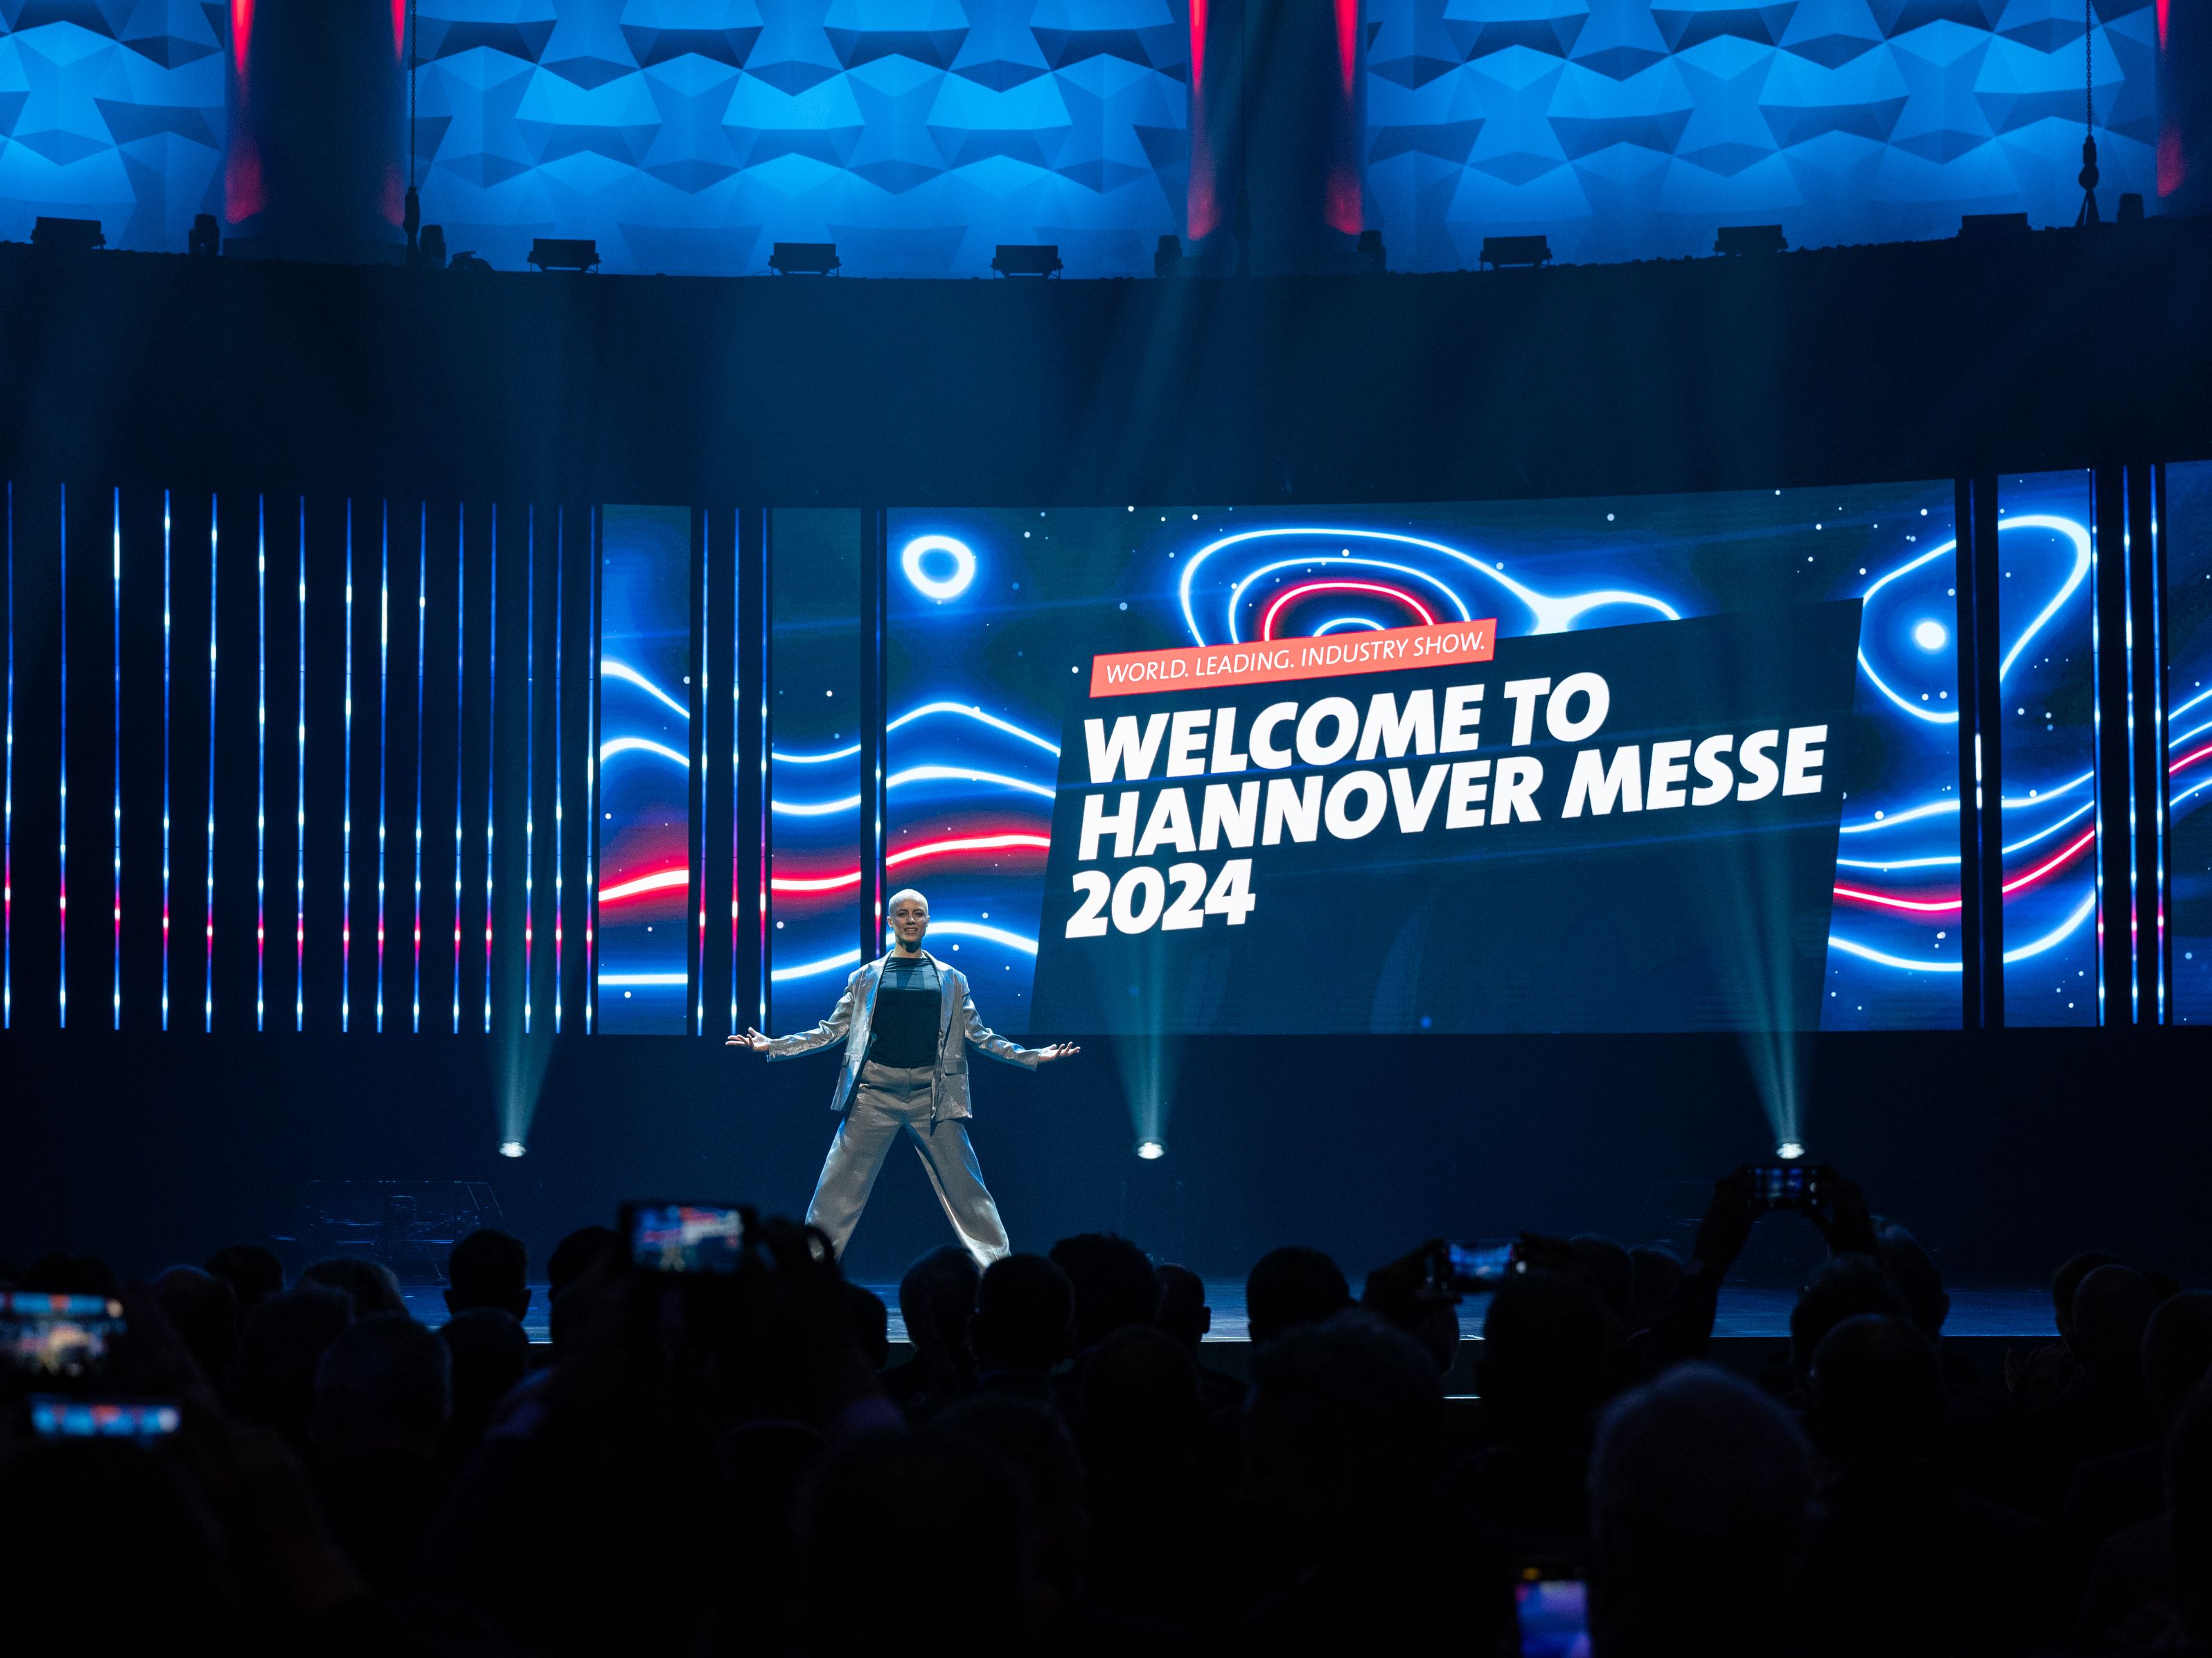 Hannover Messe 2024, Opening Ceremony